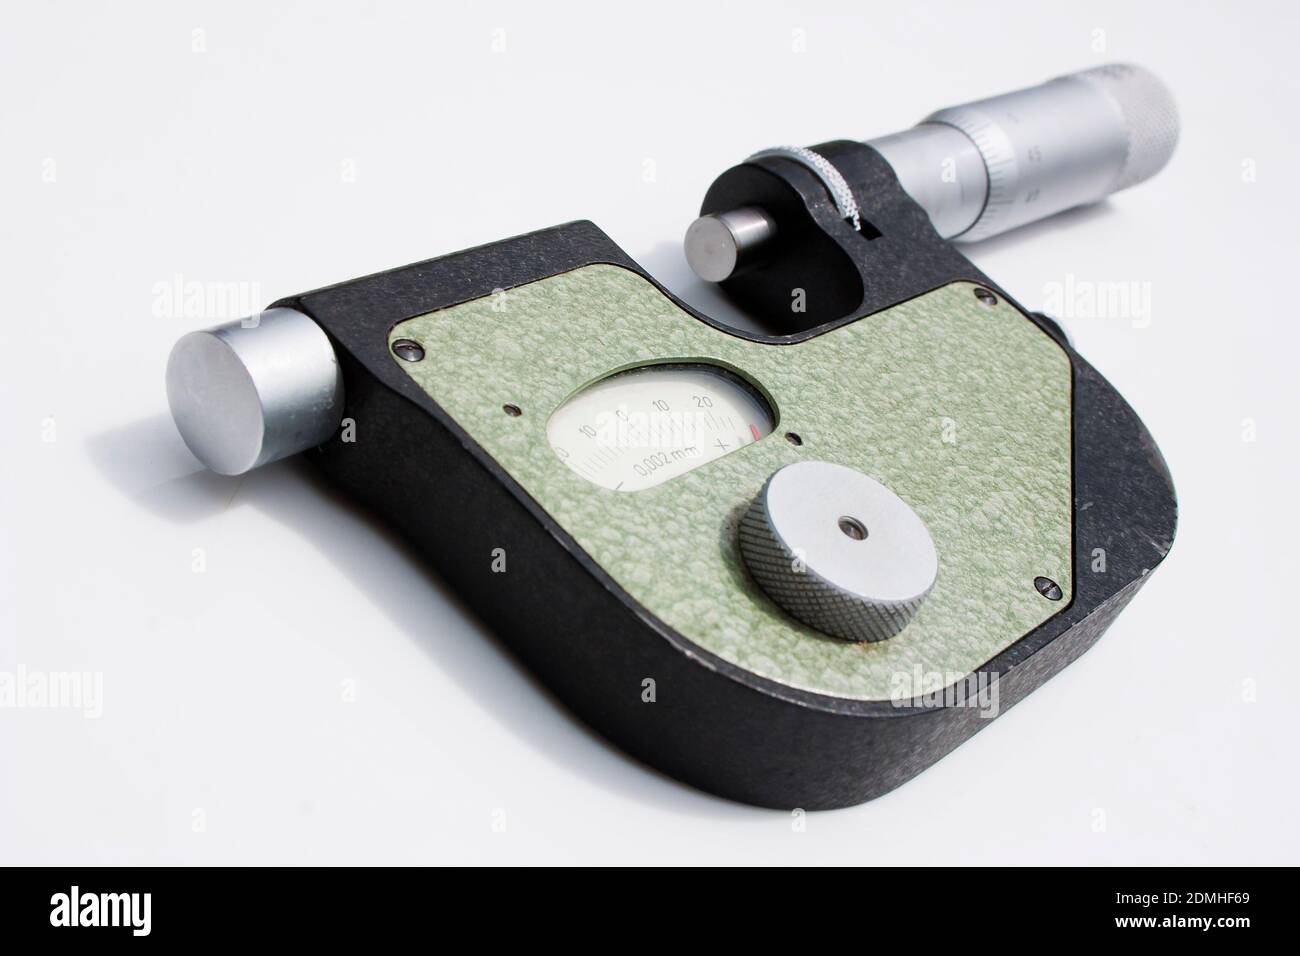 This is a micrometer. Precise measuring instrument - micrometer or indicator-type bracket lies on a white surface Stock Photo